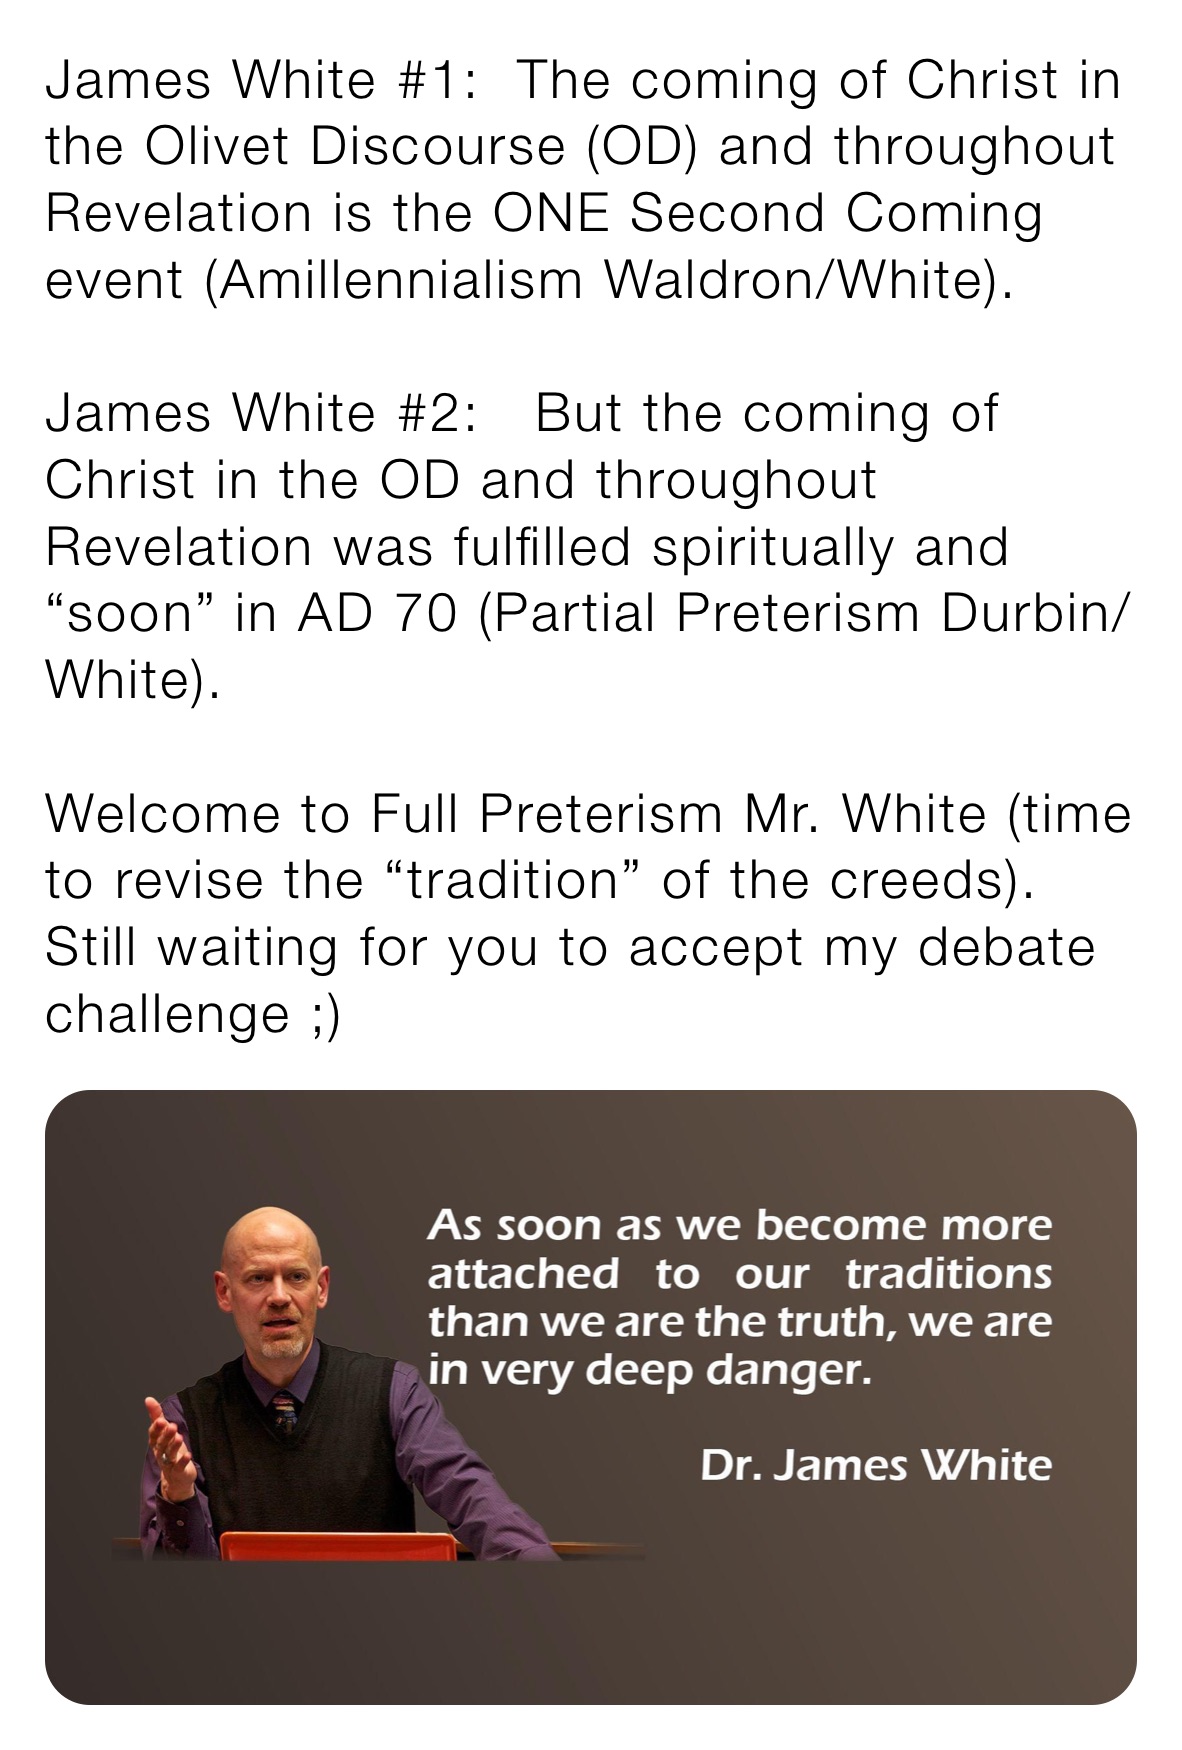 James White #1:  The coming of Christ in the Olivet Discourse (OD) and throughout Revelation is the ONE Second Coming event (Amillennialism Waldron/White).

James White #2:   But the coming of Christ in the OD and throughout Revelation was fulfilled spiritually and “soon” in AD 70 (Partial Preterism Durbin/White).  

Welcome to Full Preterism Mr. White (time to revise the “tradition” of the creeds). Still waiting for you to accept my debate challenge ;) 